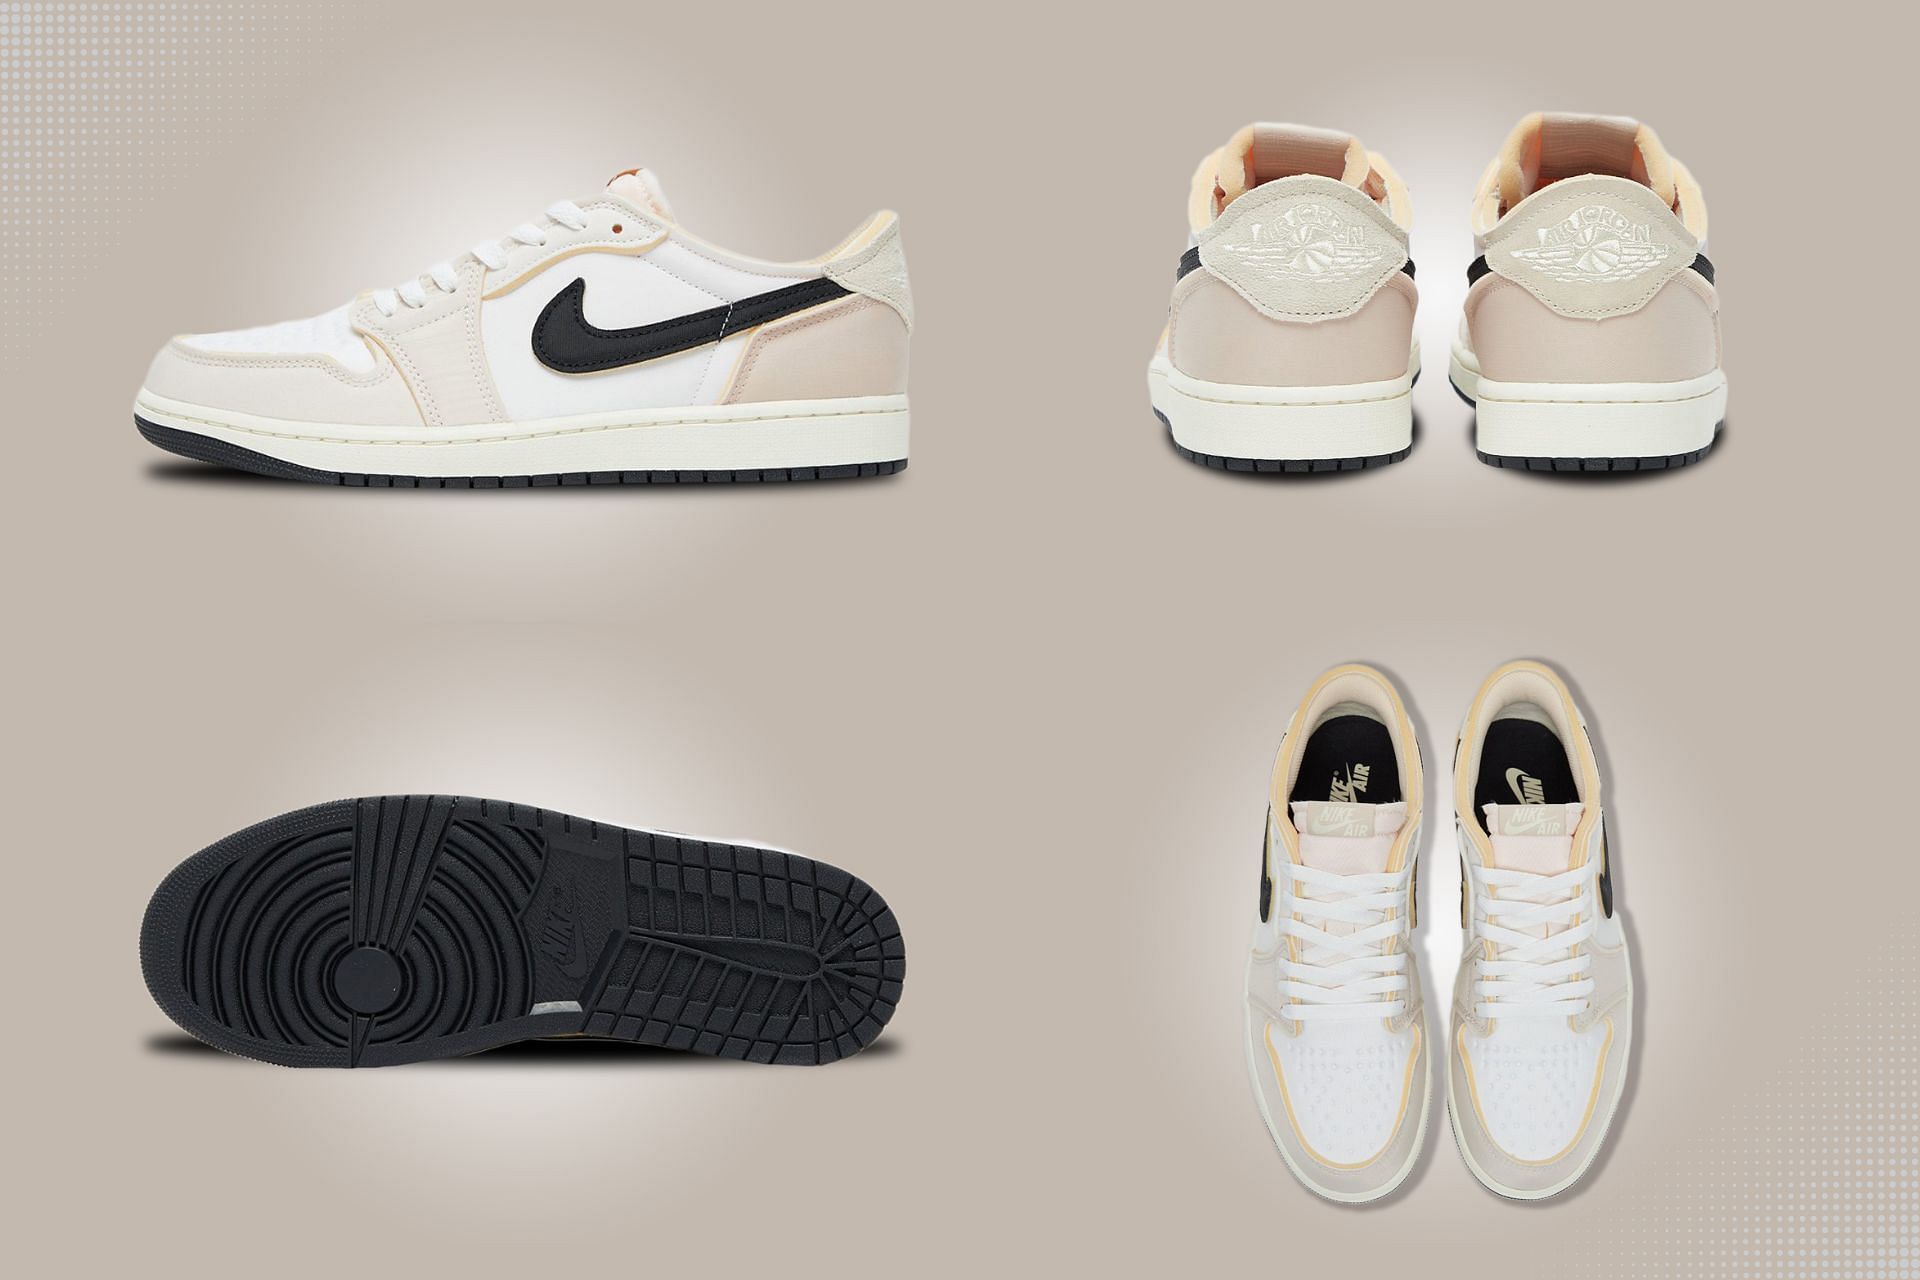 The upcoming Nike Air Jordan 1 Low OG EX Sail retro sneakers are modernized by deconstructed and inside-out aesthetics (Image via Sportskeeda)